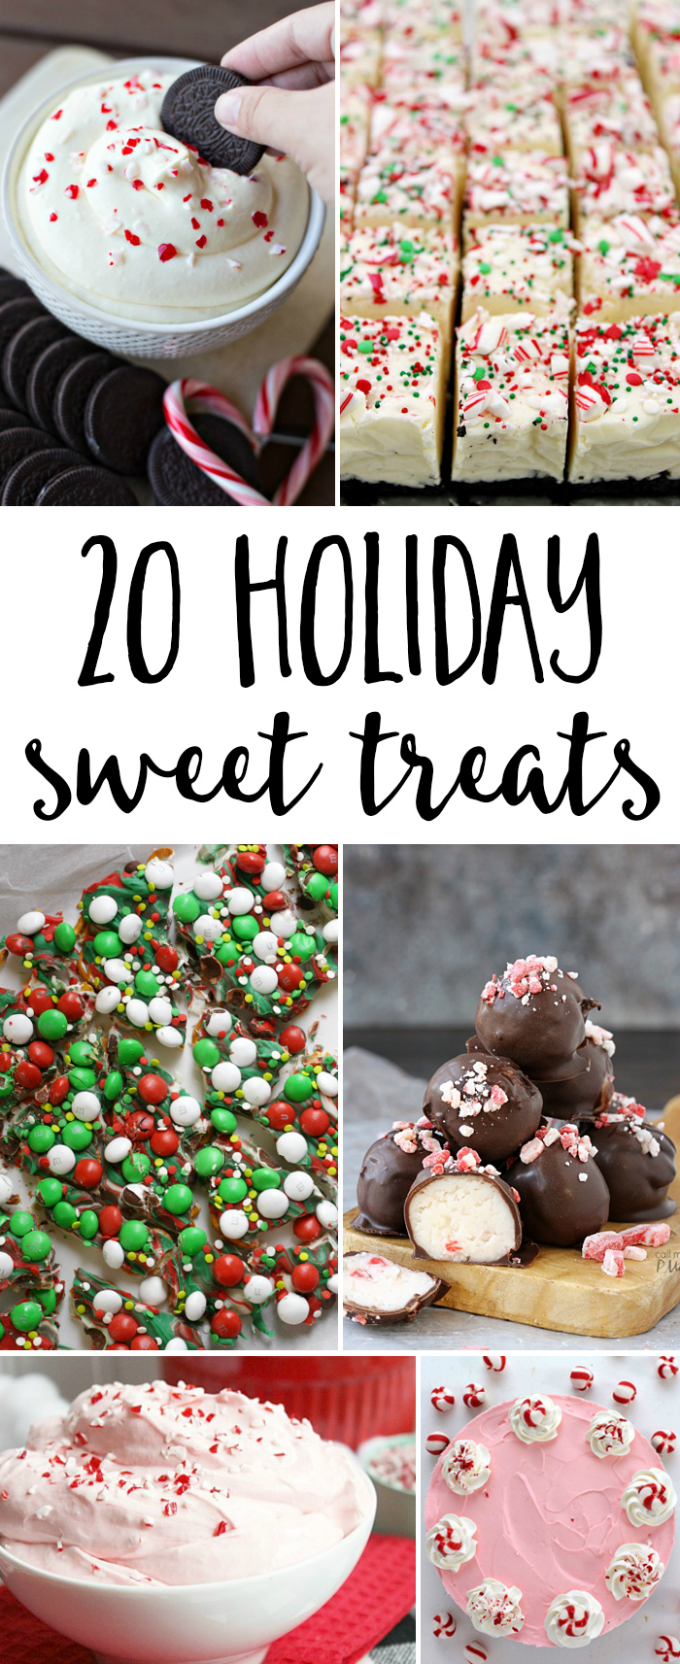 20 Holiday Sweet Treats. A sweet and fun roundup of 20 holiday treats that will make perfect food gifts, or can simply be enjoyed with your loved ones!